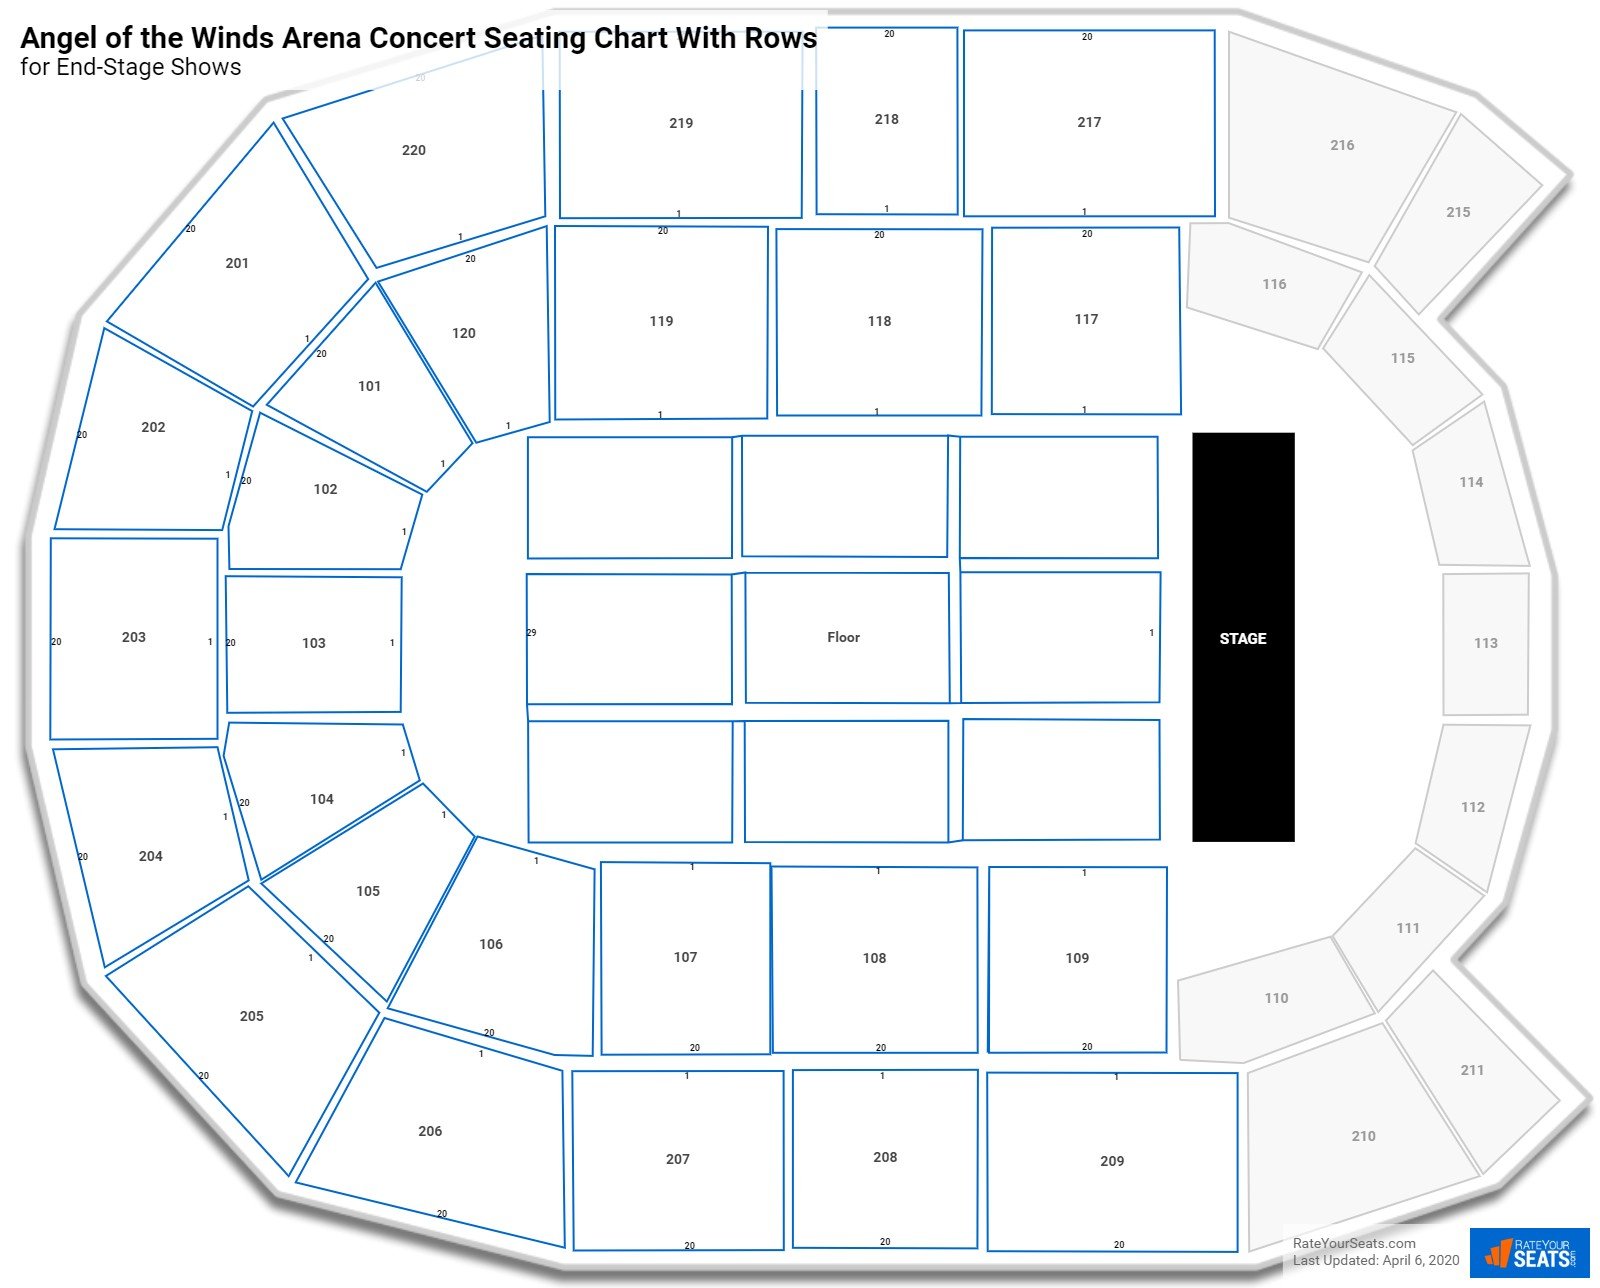 Angel of the Winds Arena seating chart with row numbers